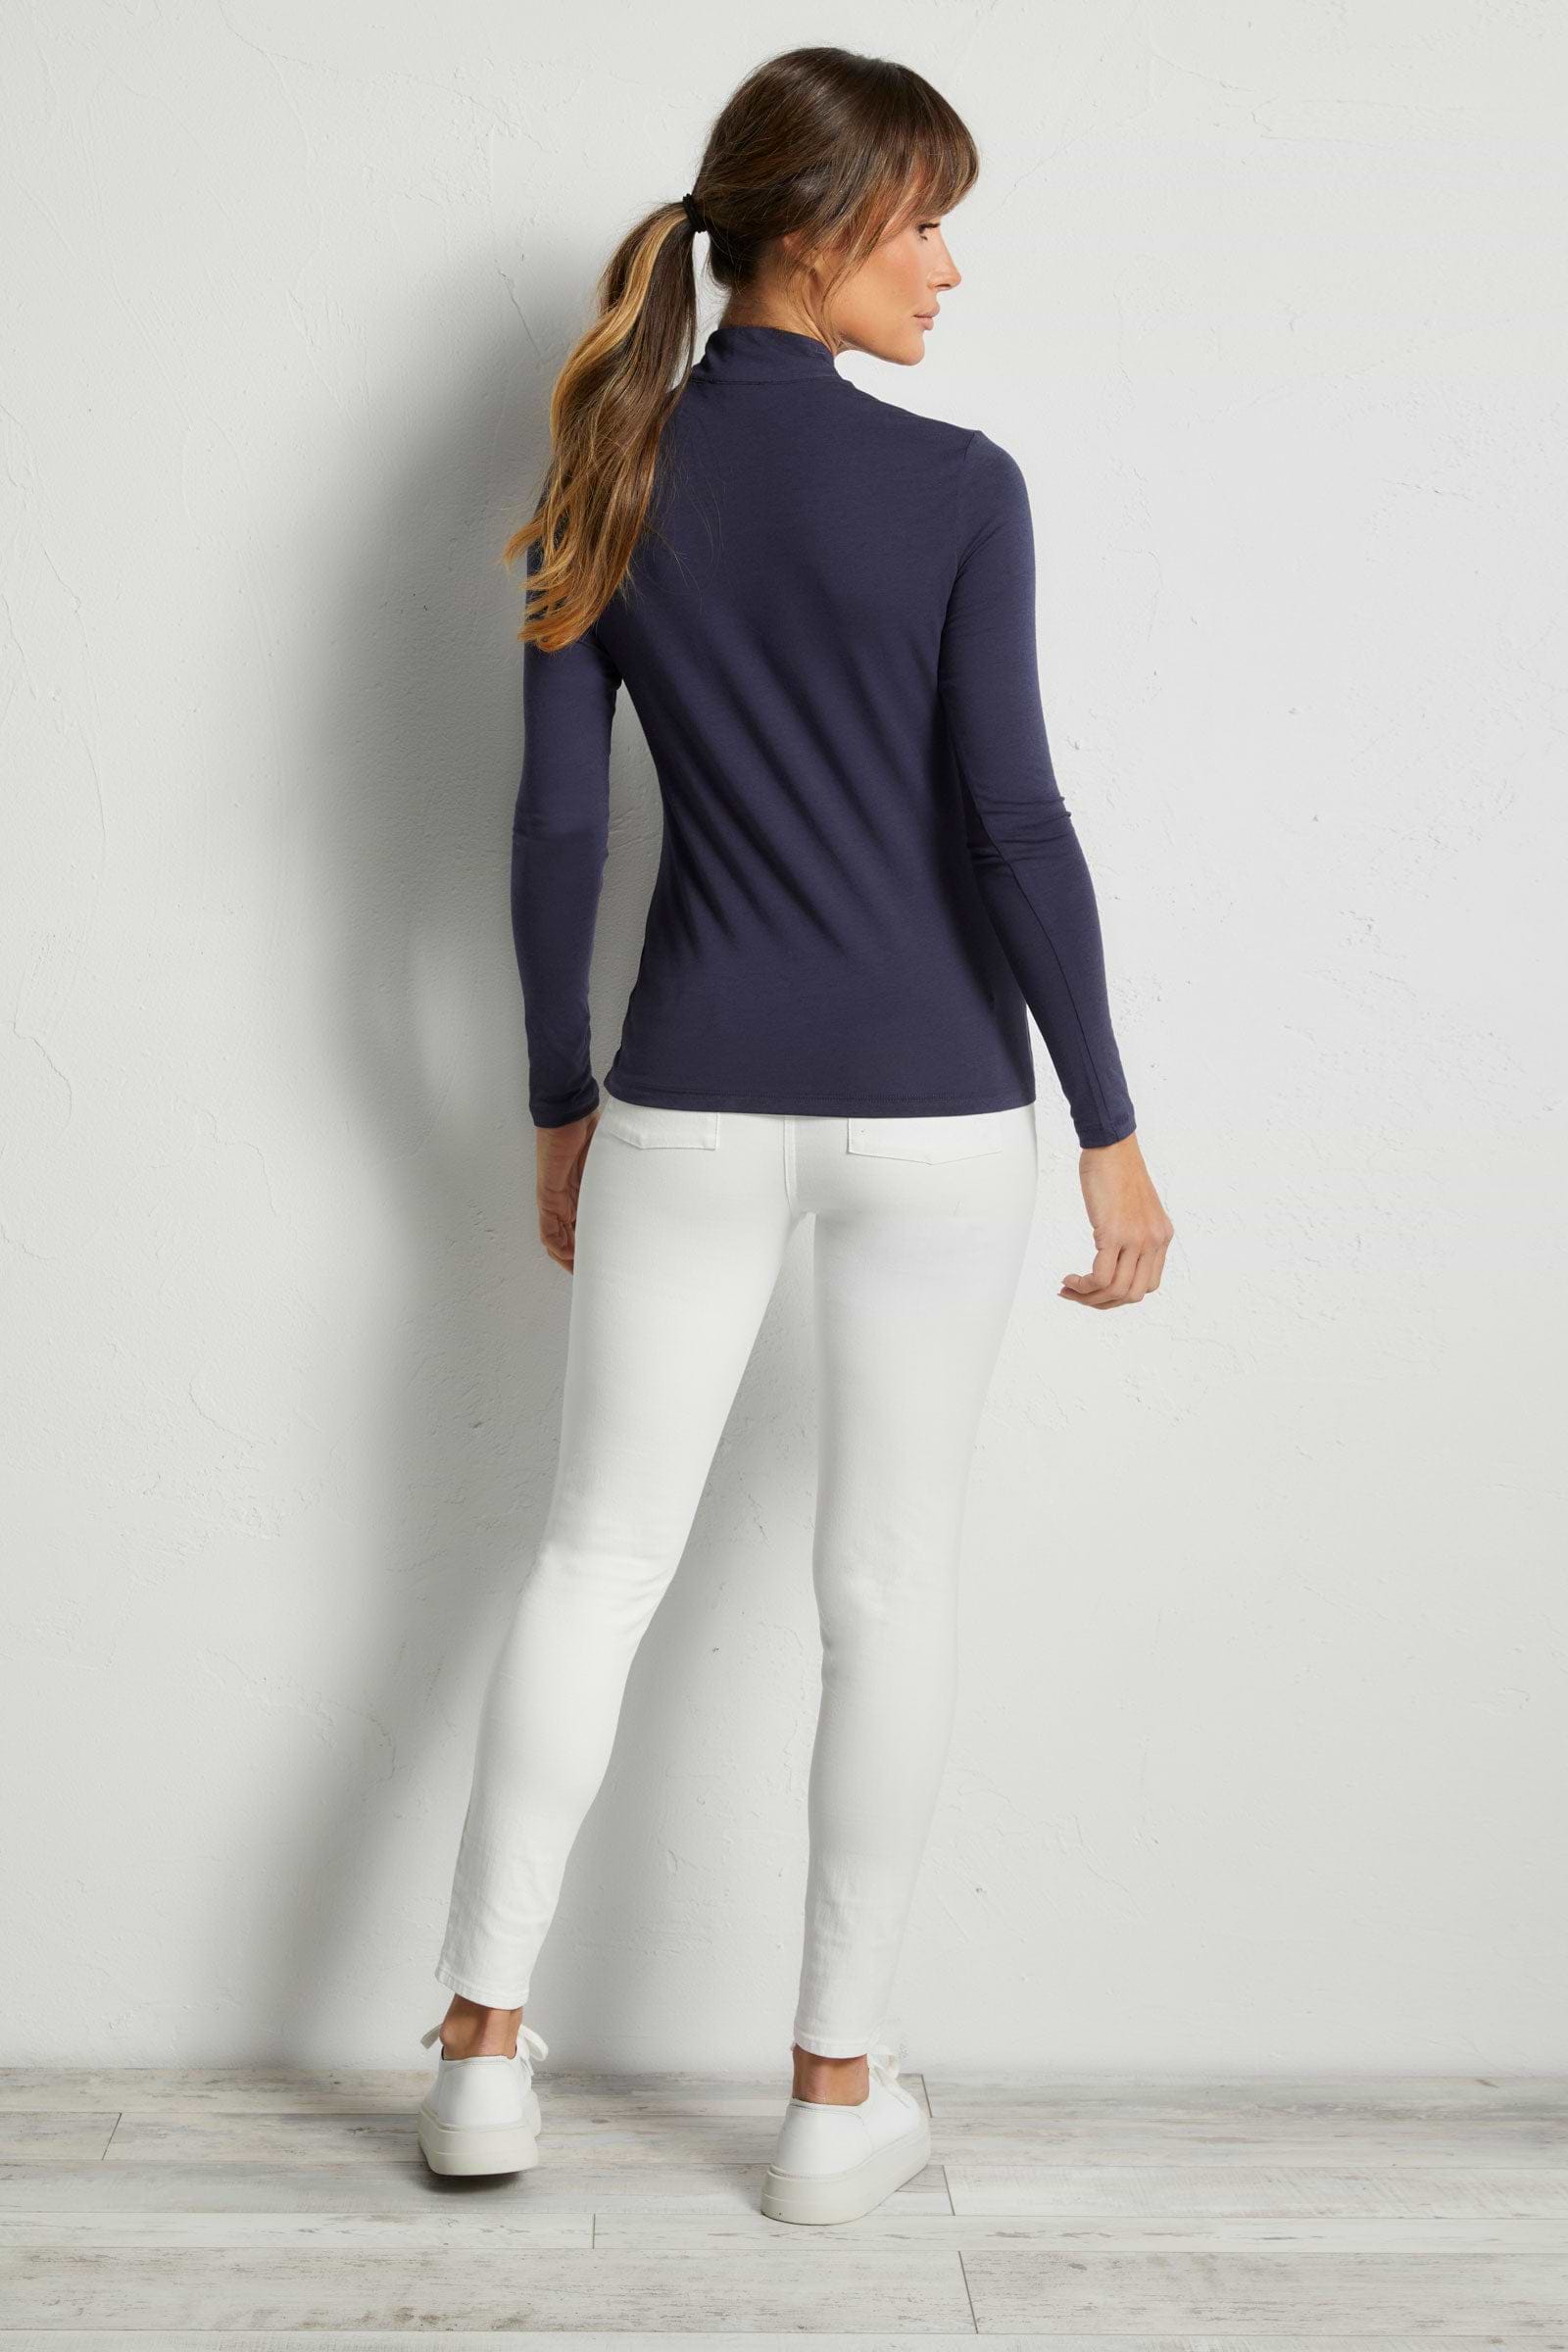 The Best Travel Top. Woman Showing the Back Profile of a Stacey Top in Navy.